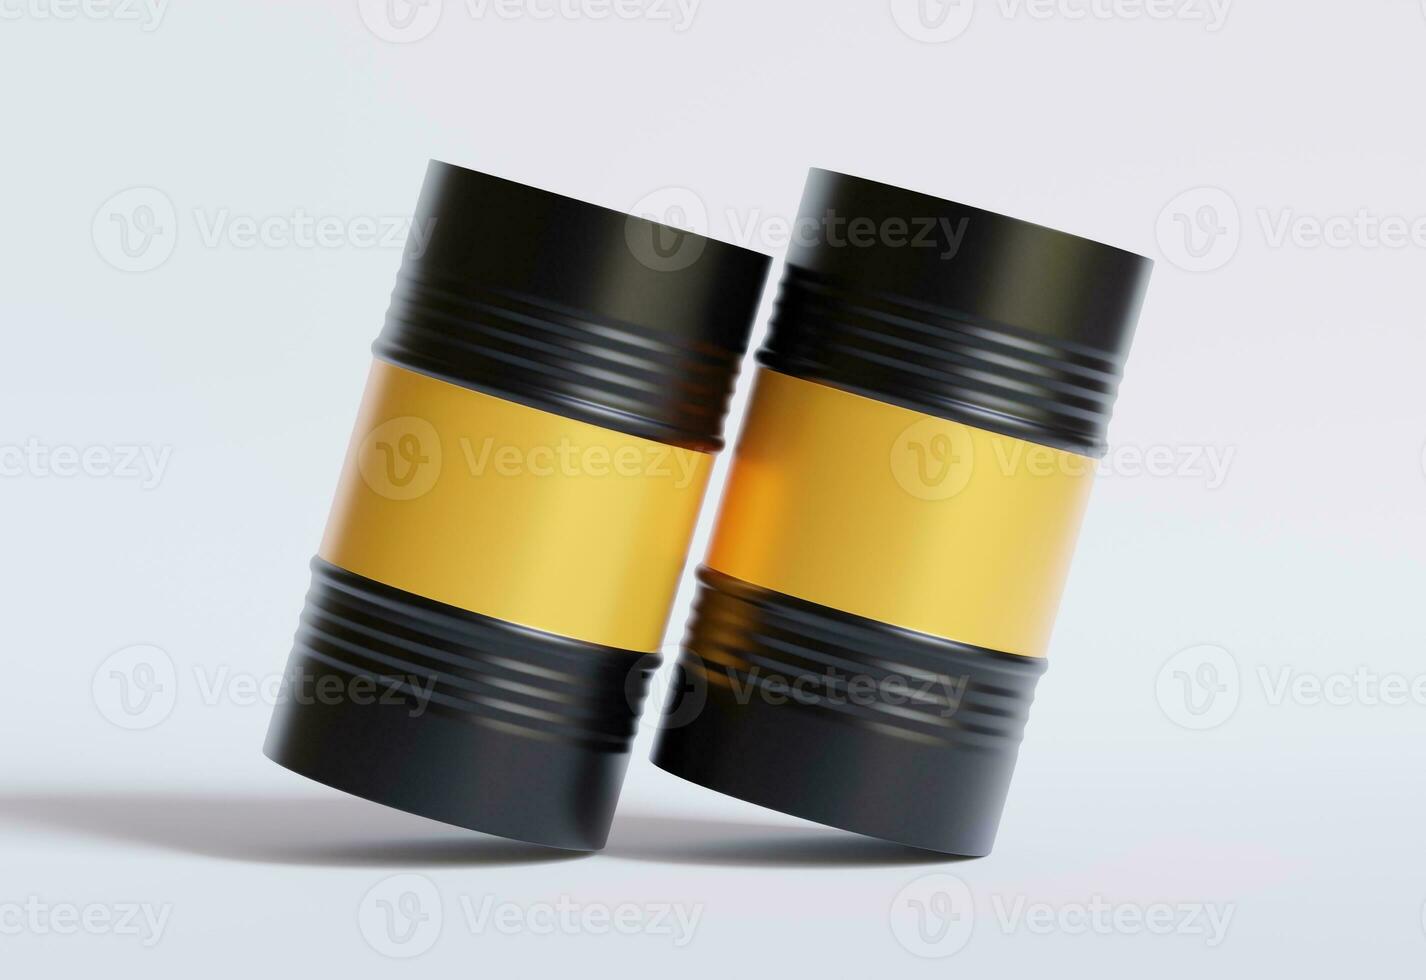 Drum Container oil industry. Gold and black barrels with oil drop label on spilled puddle of crude oil. Object of illustration isolated on white background photo